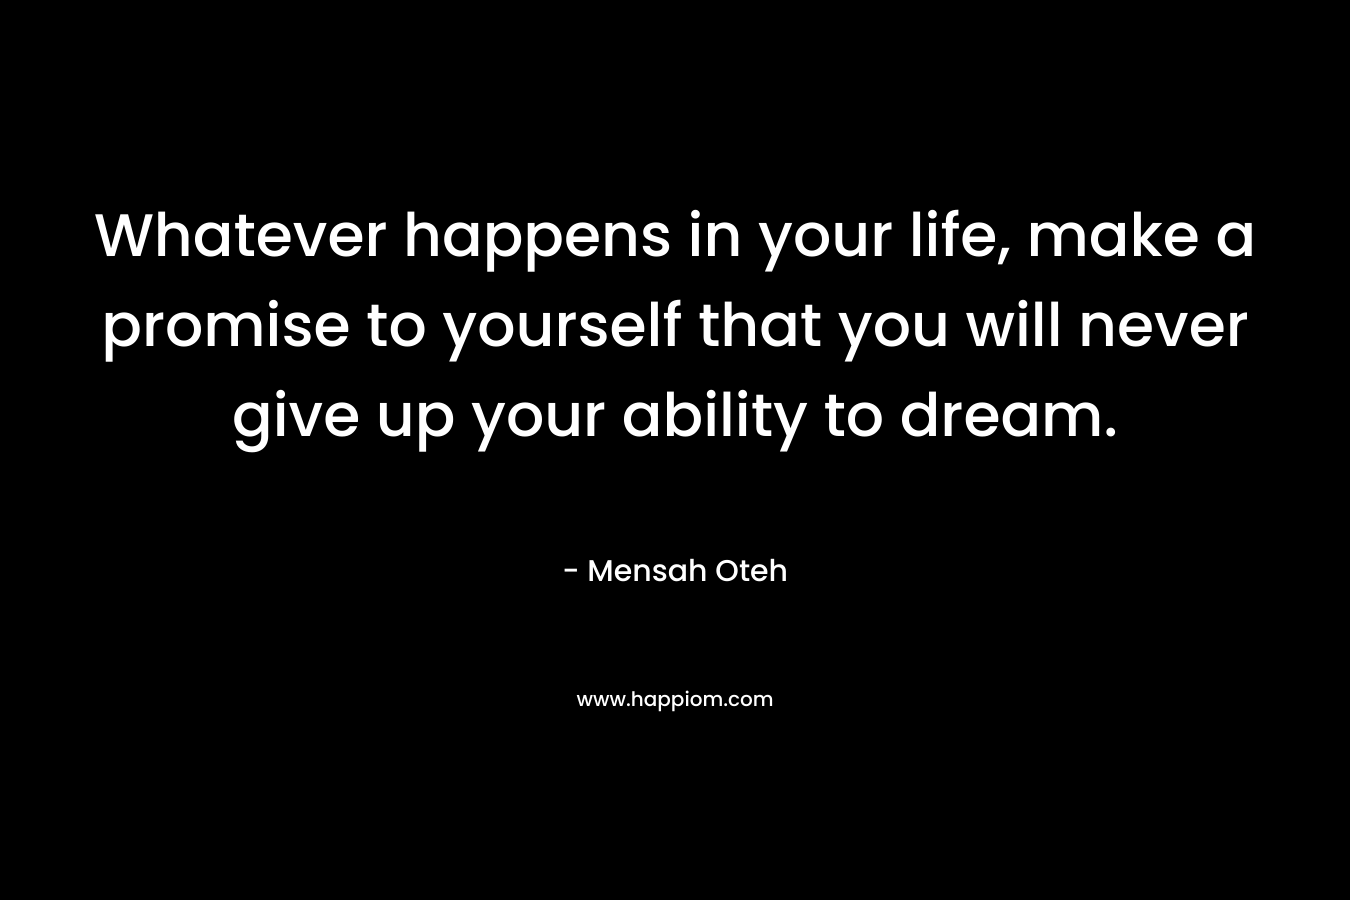 Whatever happens in your life, make a promise to yourself that you will never give up your ability to dream.